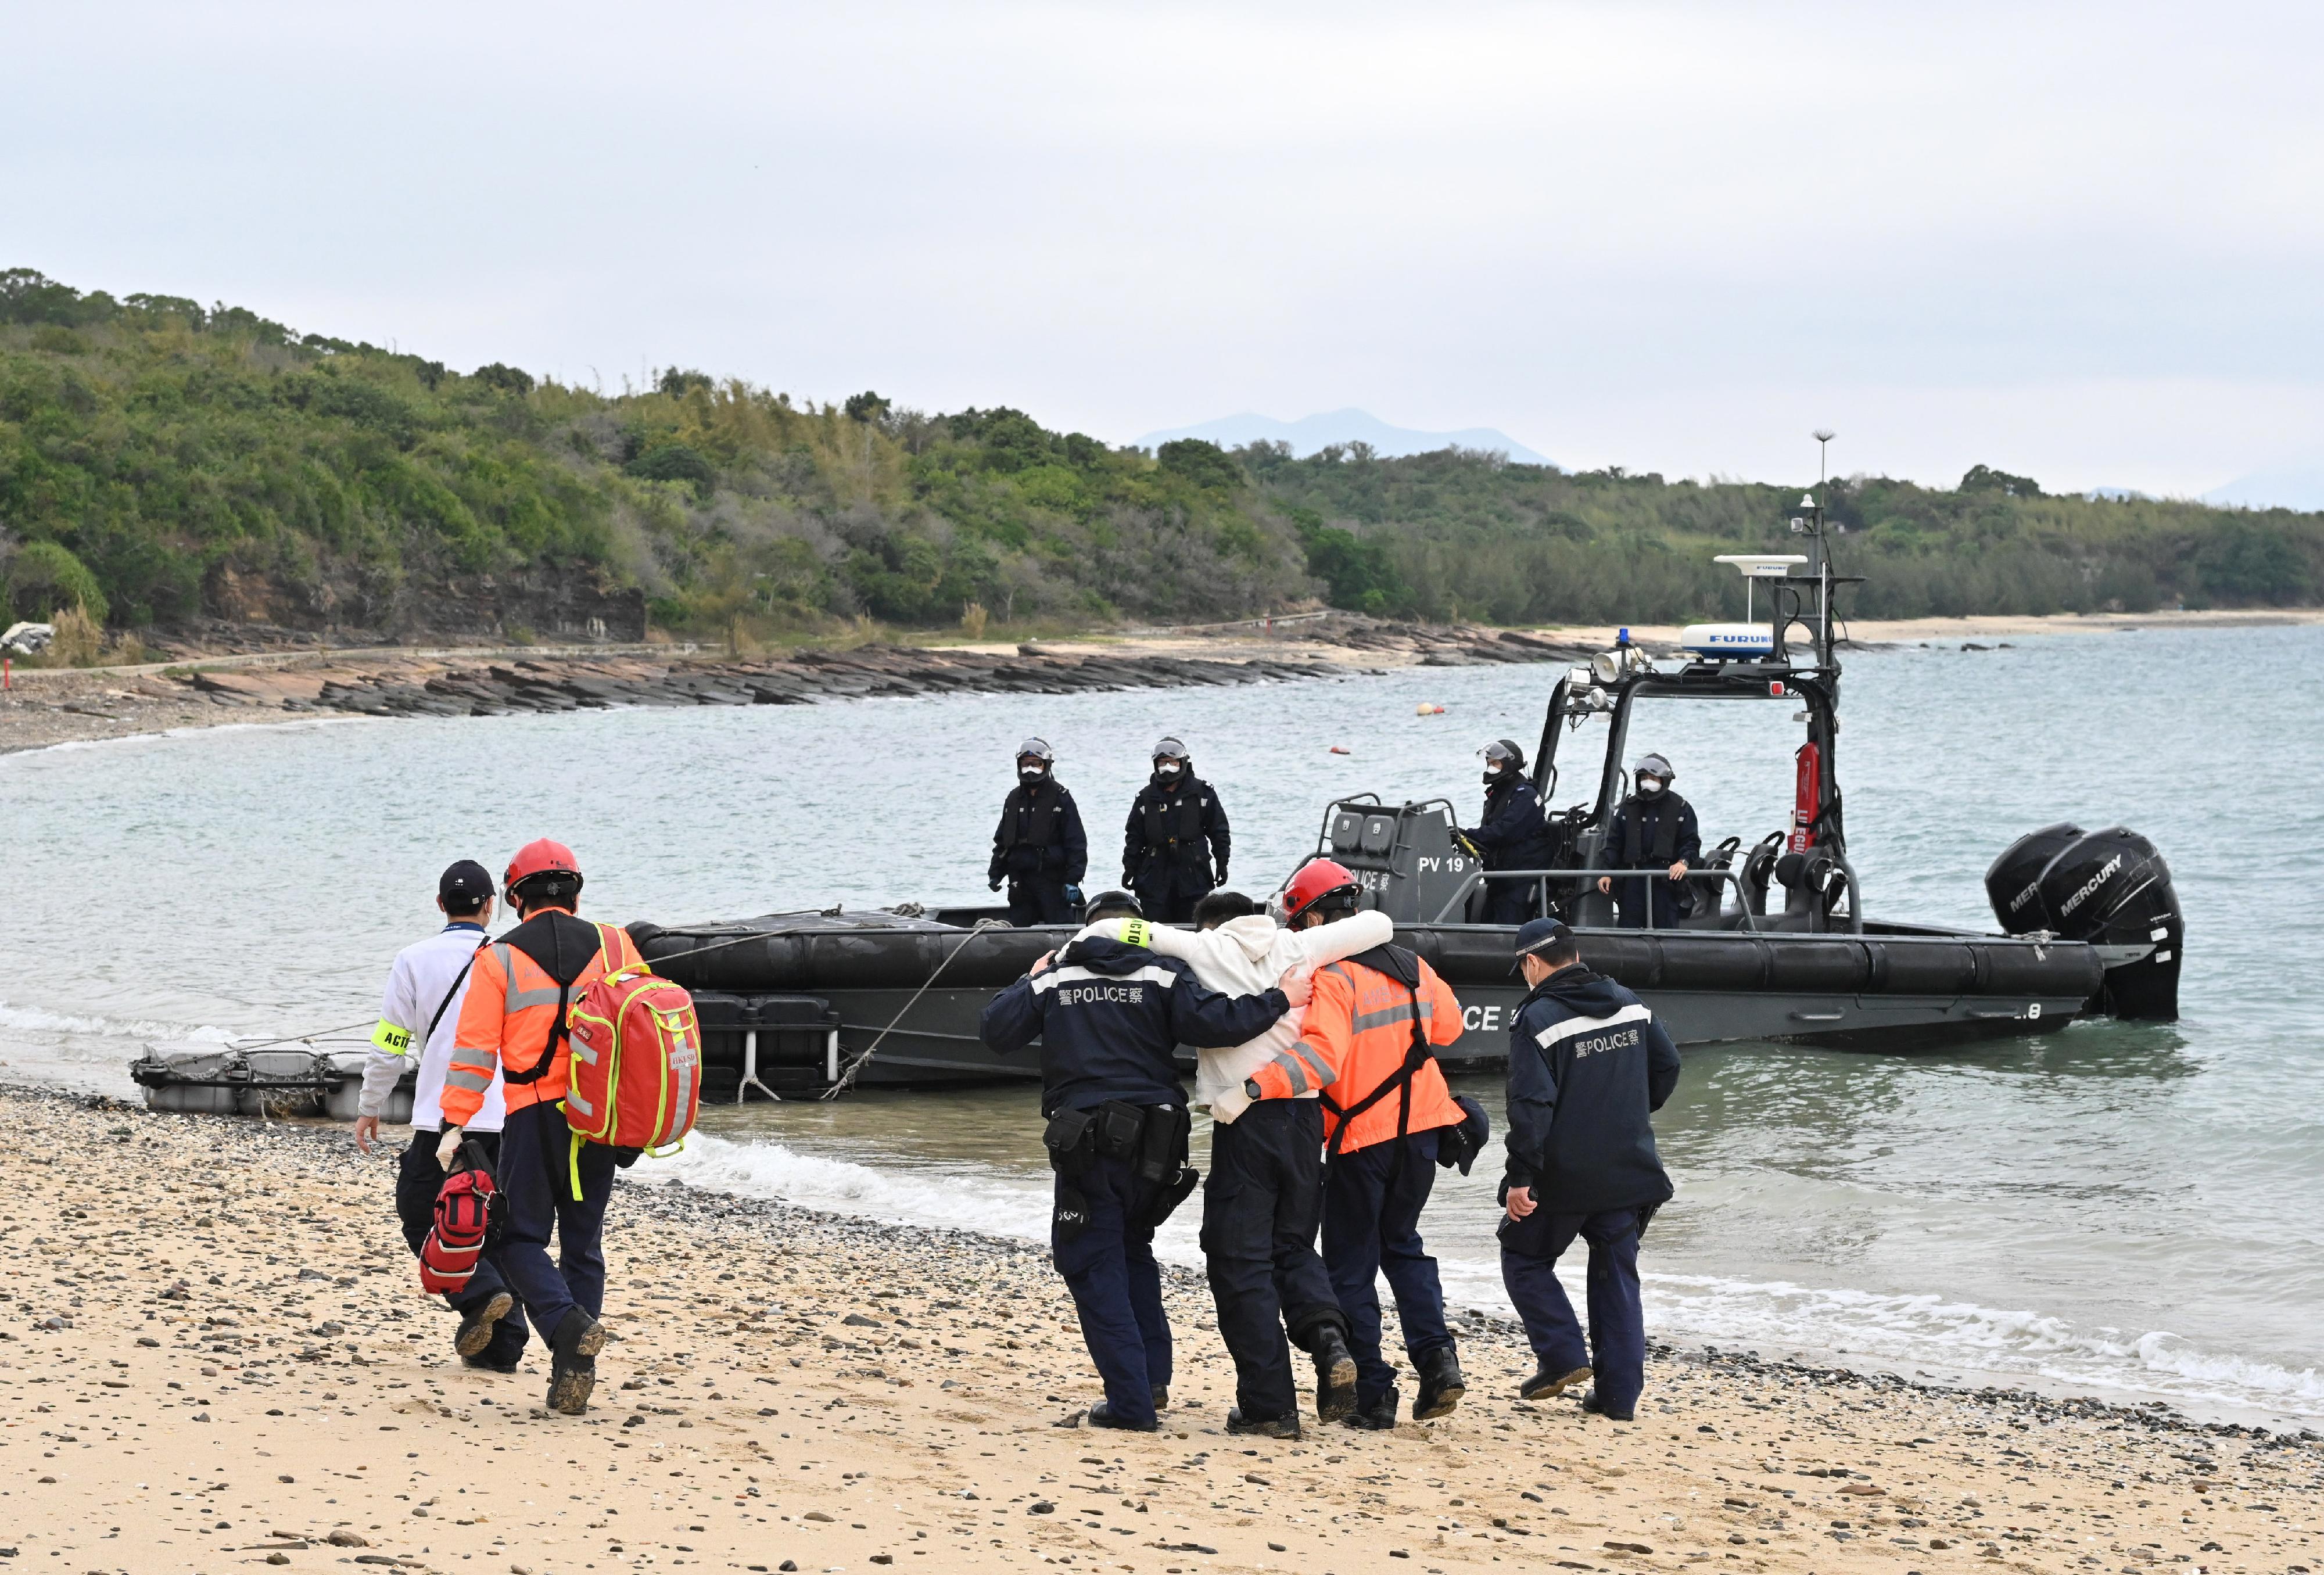 The Government conducted an inter-departmental exercise, "Checkerboard III", today (January 12). Photo shows the Police evacuating an injured person from Tung Ping Chau with police patrol craft.